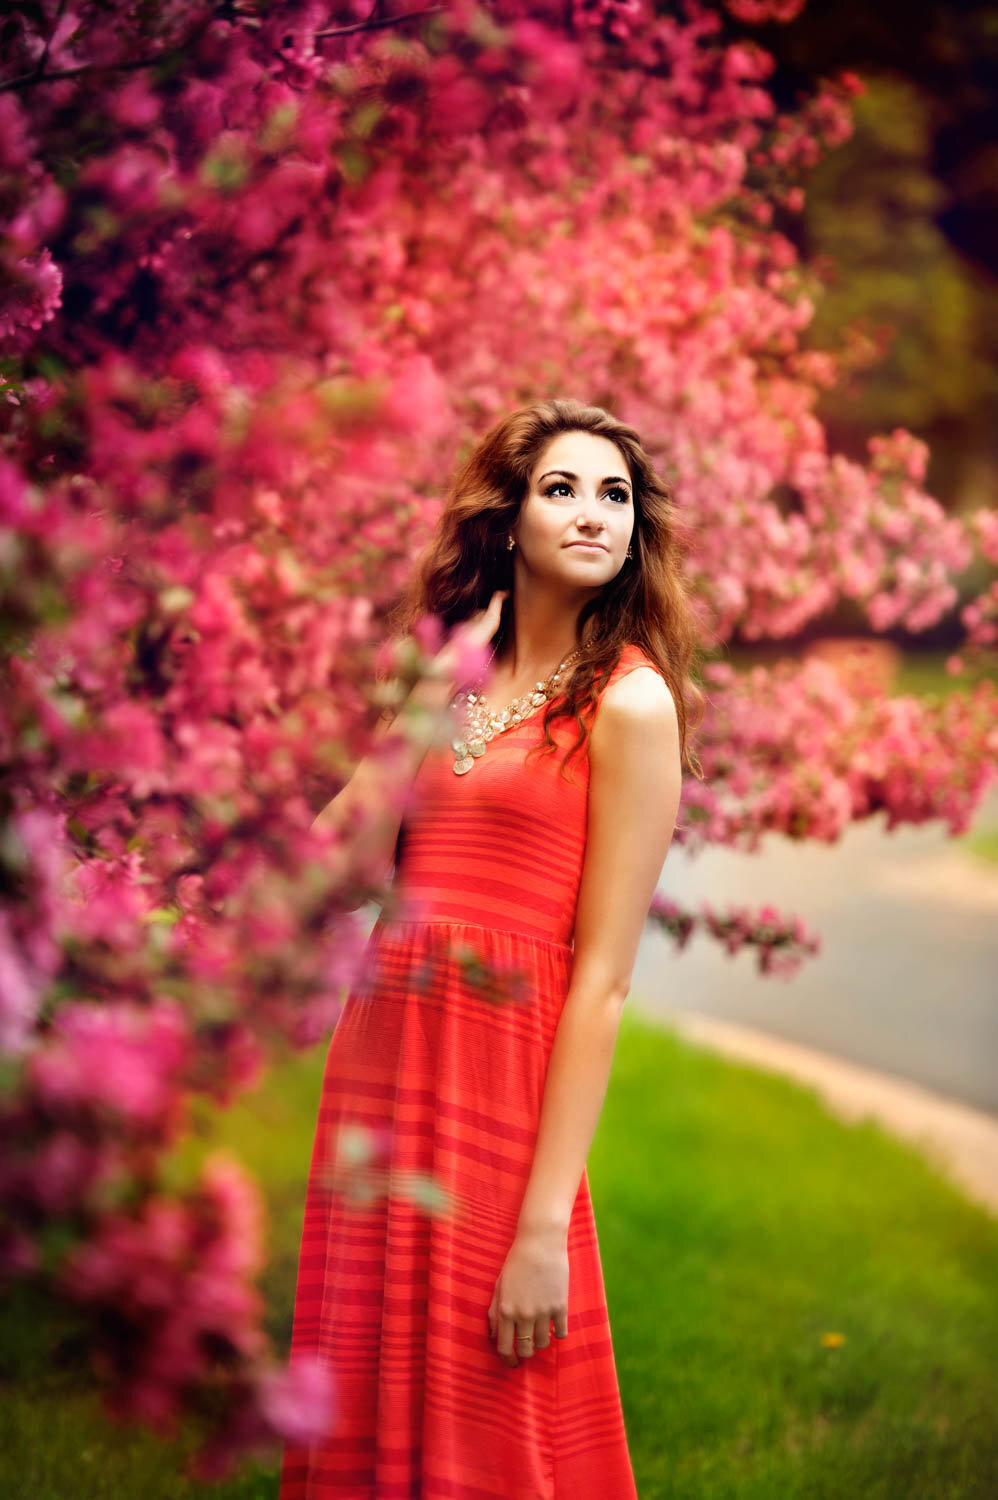 high school senior photo of girl in orange dress with pink blossoms in spring